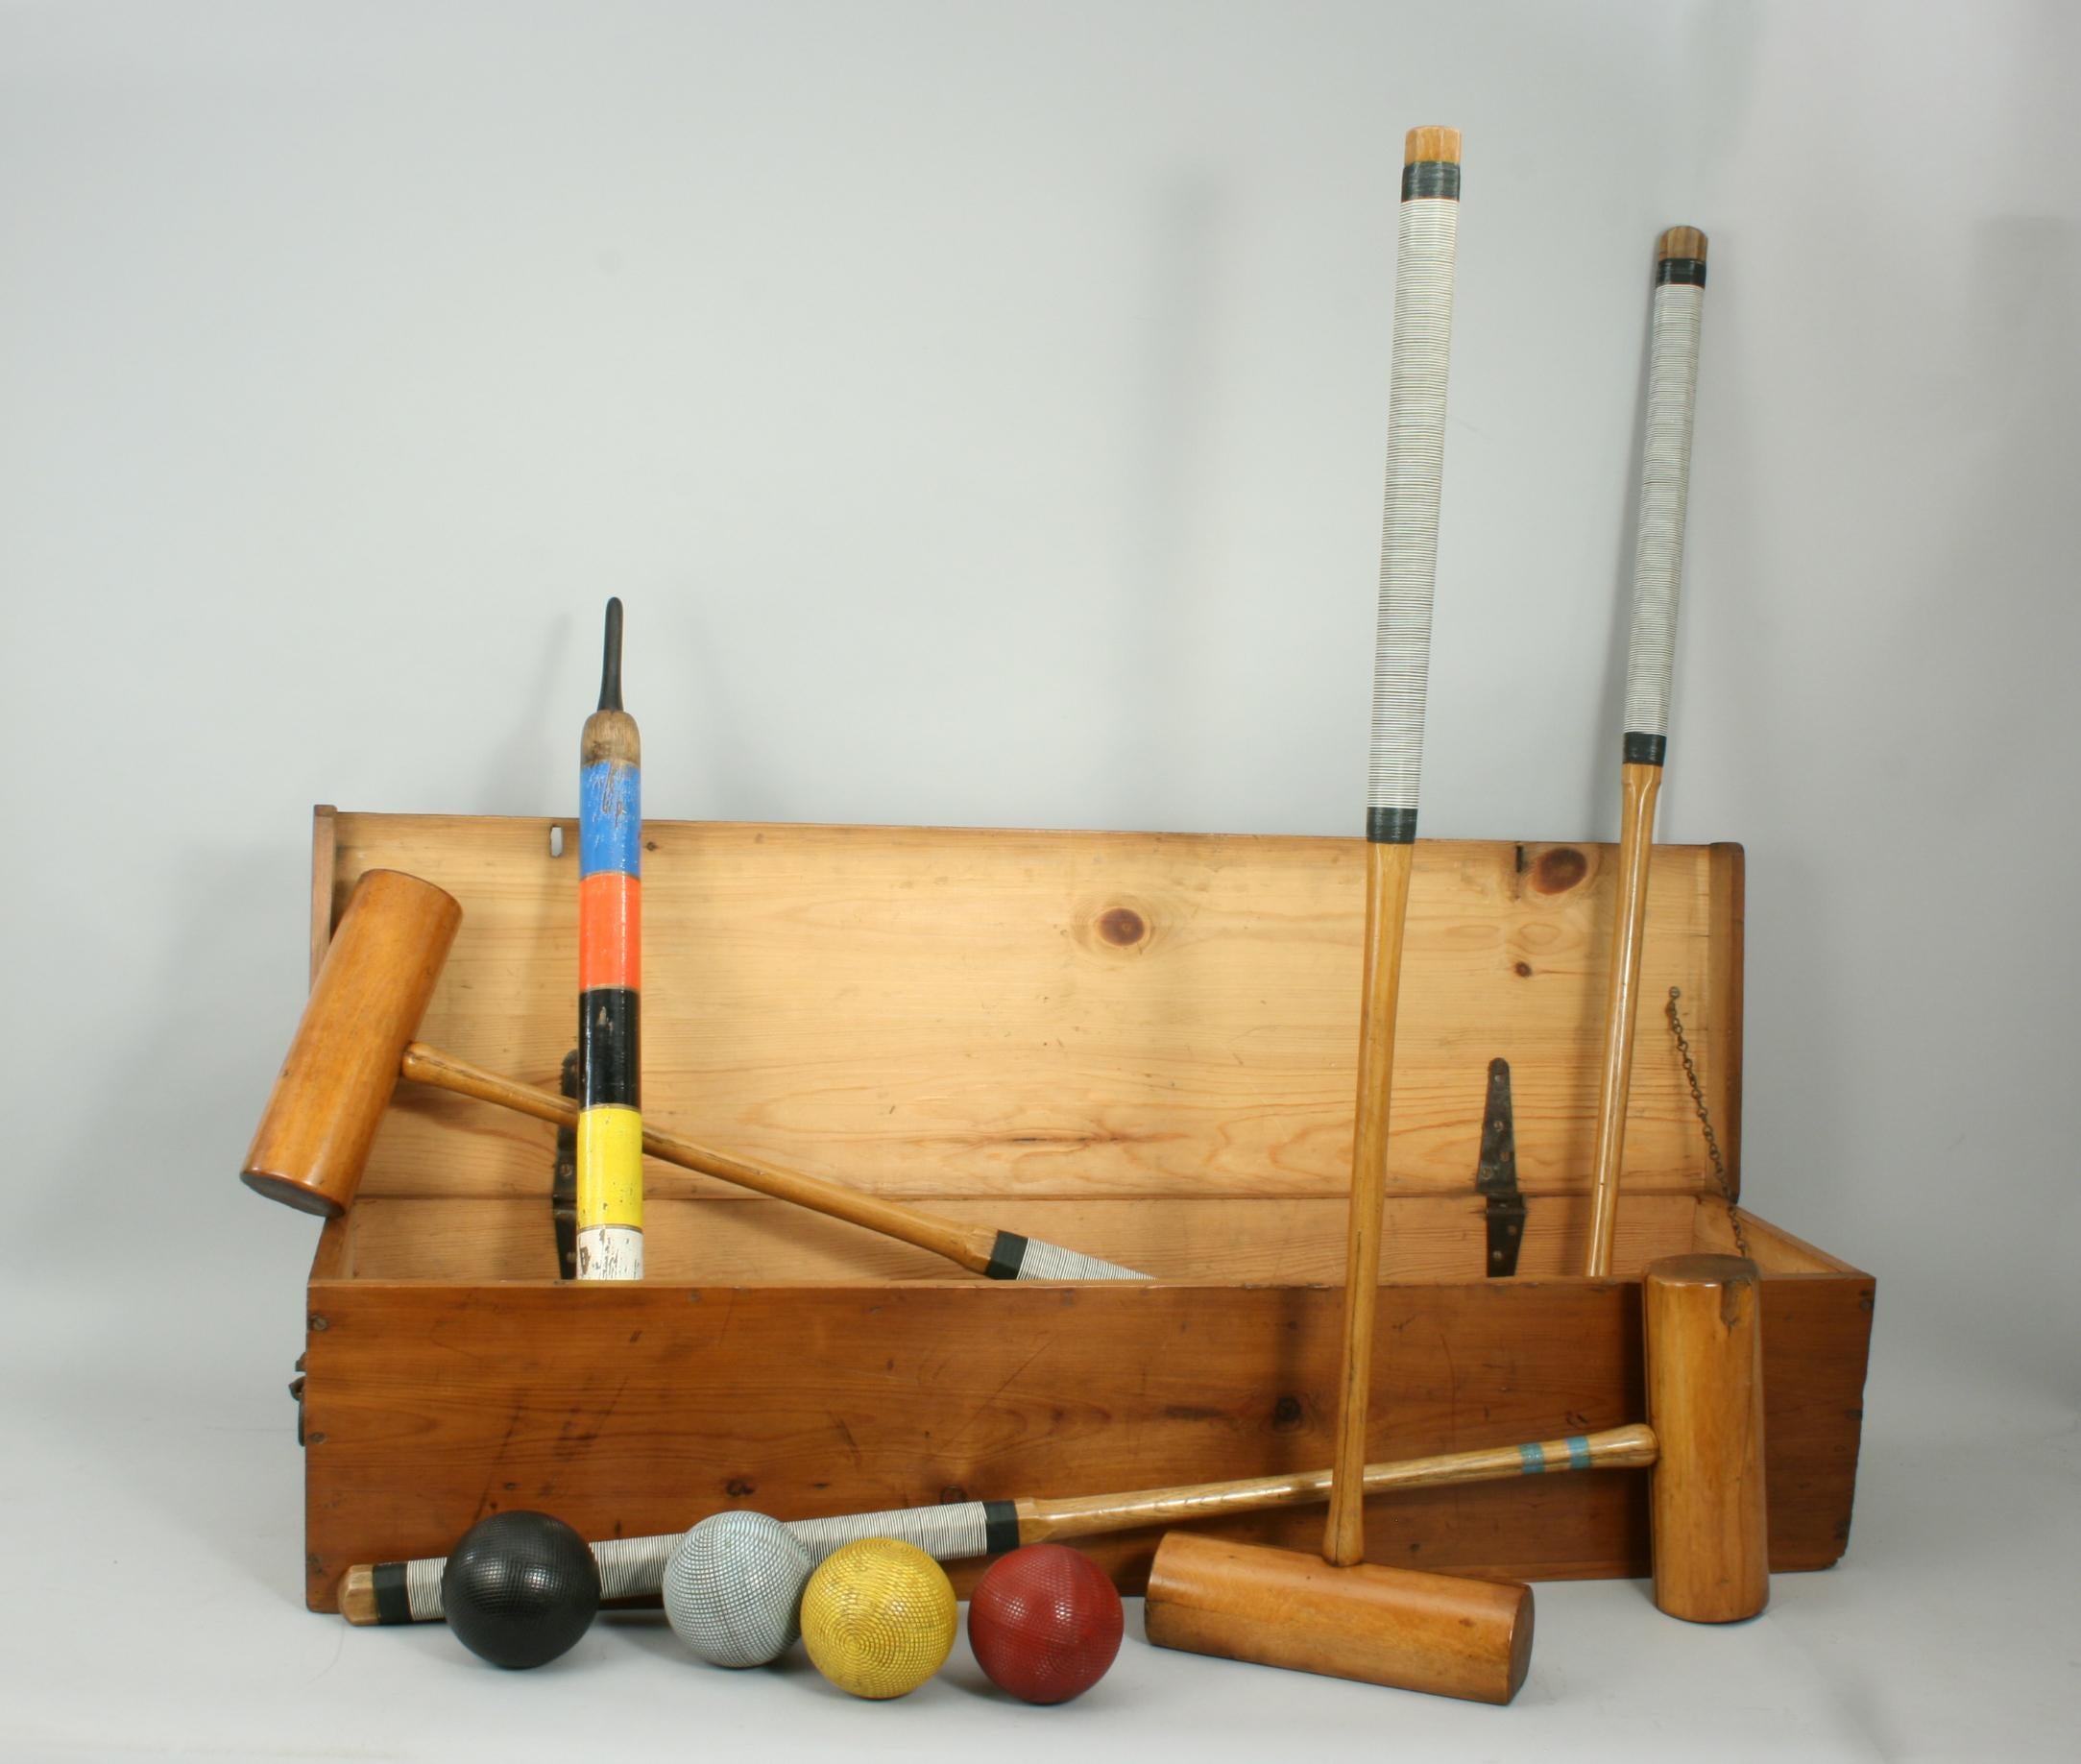 Sporting Art Vintage Croquet Set in Pine Box, Jaques, London, Army and Navy Co-Op Society Ltd